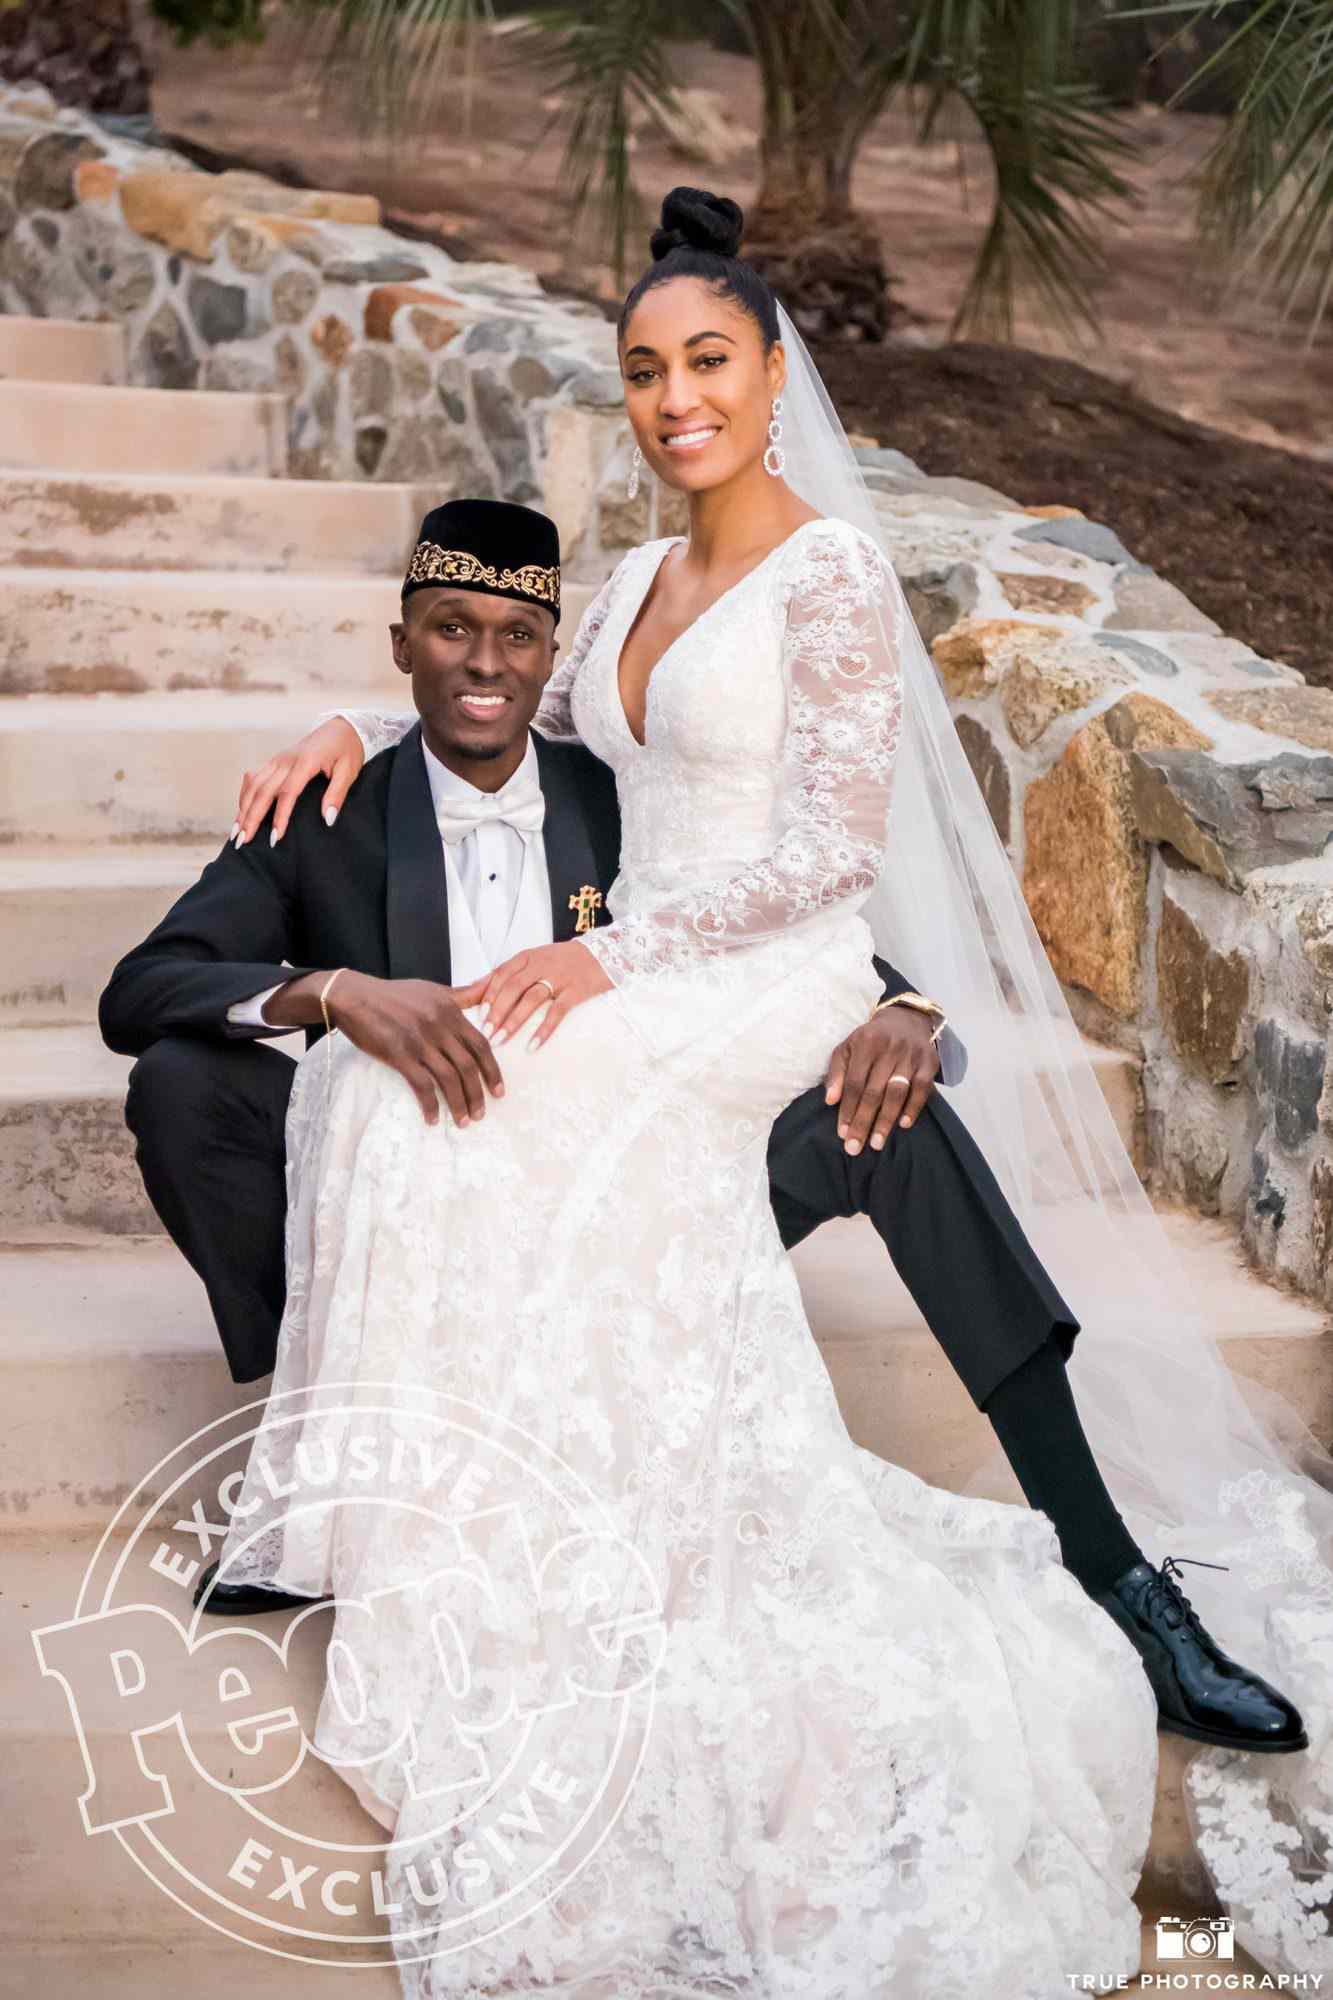 <p>Olympic athletes Harrison and Claye said "I do" on Oct. 13 in Jamul, California, two years after they got engaged during the 2016 Rio de Janiero summer Olympics.</p>
                            <p>The lovebirds celebrated their nupituals with a traditional Sierra Leone engagement (to honor Claye's heritage) the day before.</p>
                            <p>"Although it sprinkled during the ceremony, it was perfect," Harrison told PEOPLE.</p>
                            <p>Track and field athlete Claye is a three-time Olympic medalist, and Harrison, an American hurdler and sprinter, competed in the 2008 Olympic games in Beijing.</p>
                            